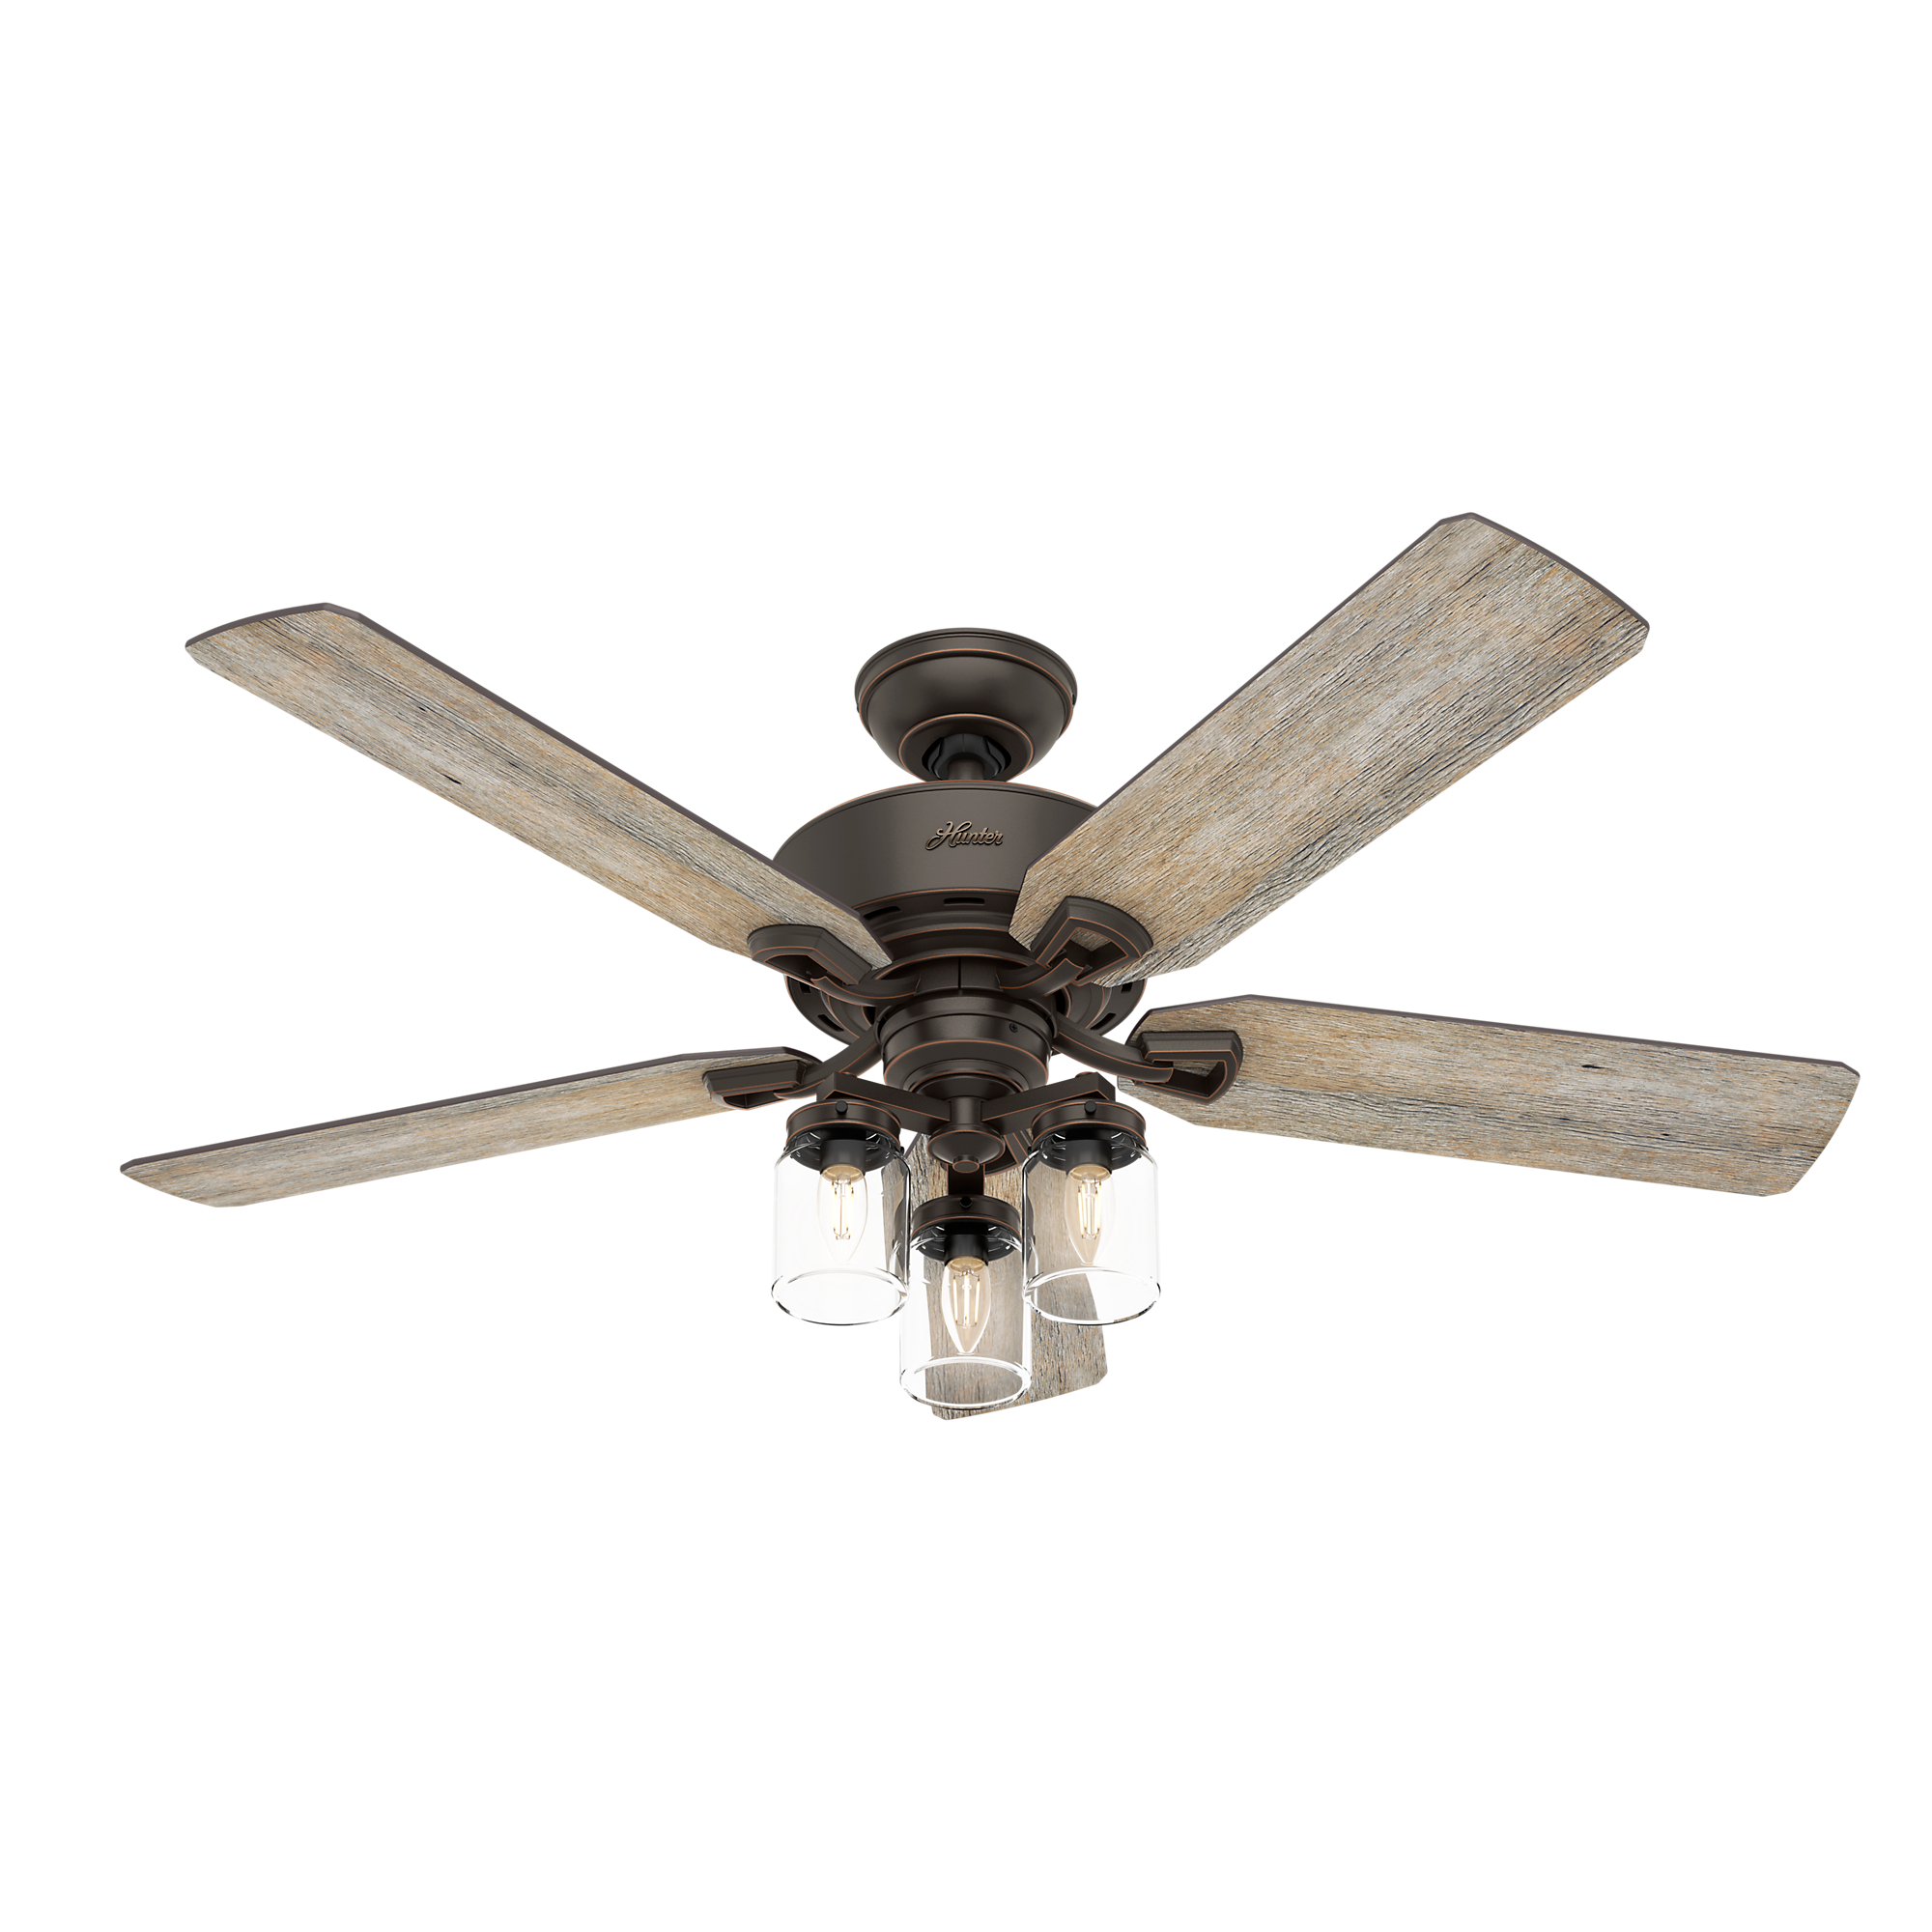 The Best Ceiling Fans For High Ceilings